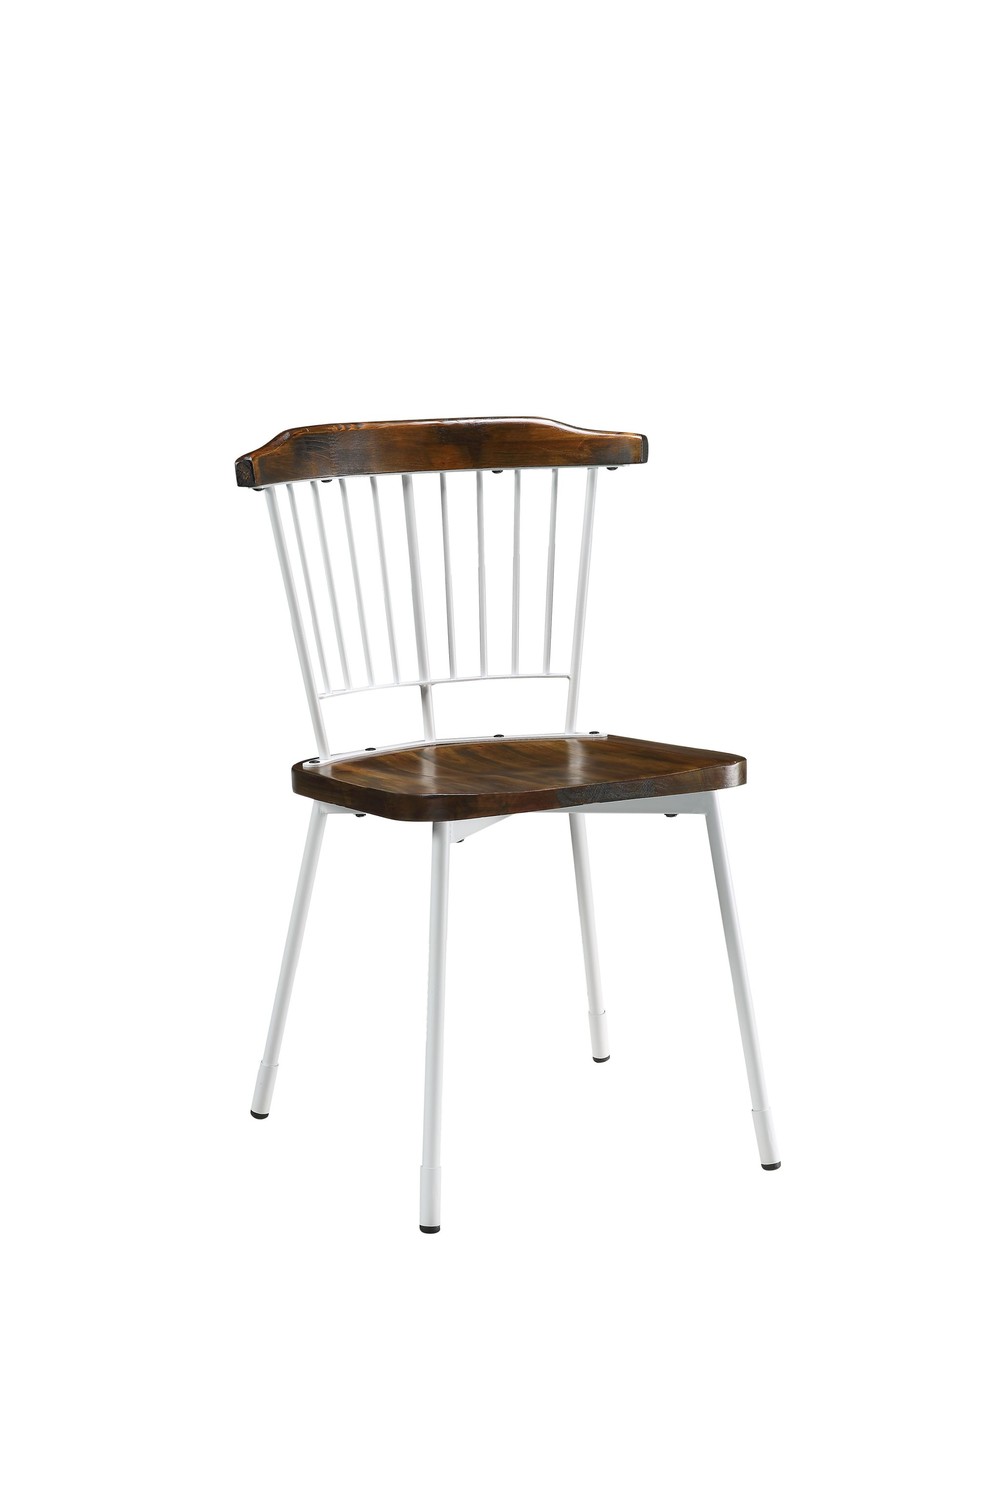 21" X 19" X 32" Brown Oak Wood and White Metal Base Side Chair Set of 2